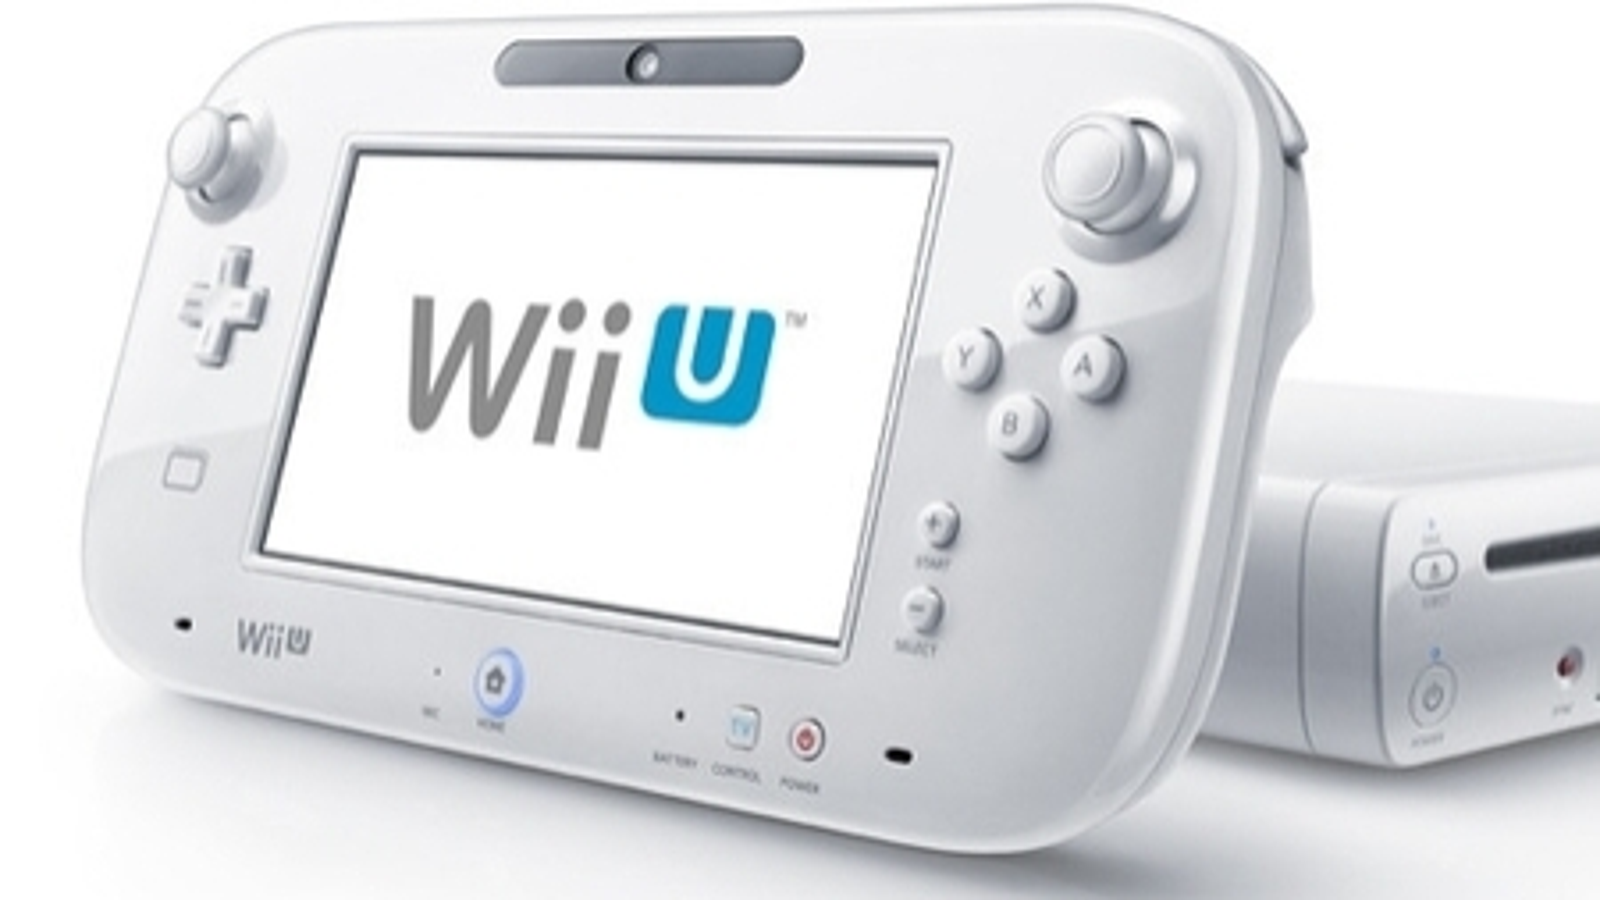 Perpetuo Excelente paridad Every Wii U UK launch game listed | Eurogamer.net